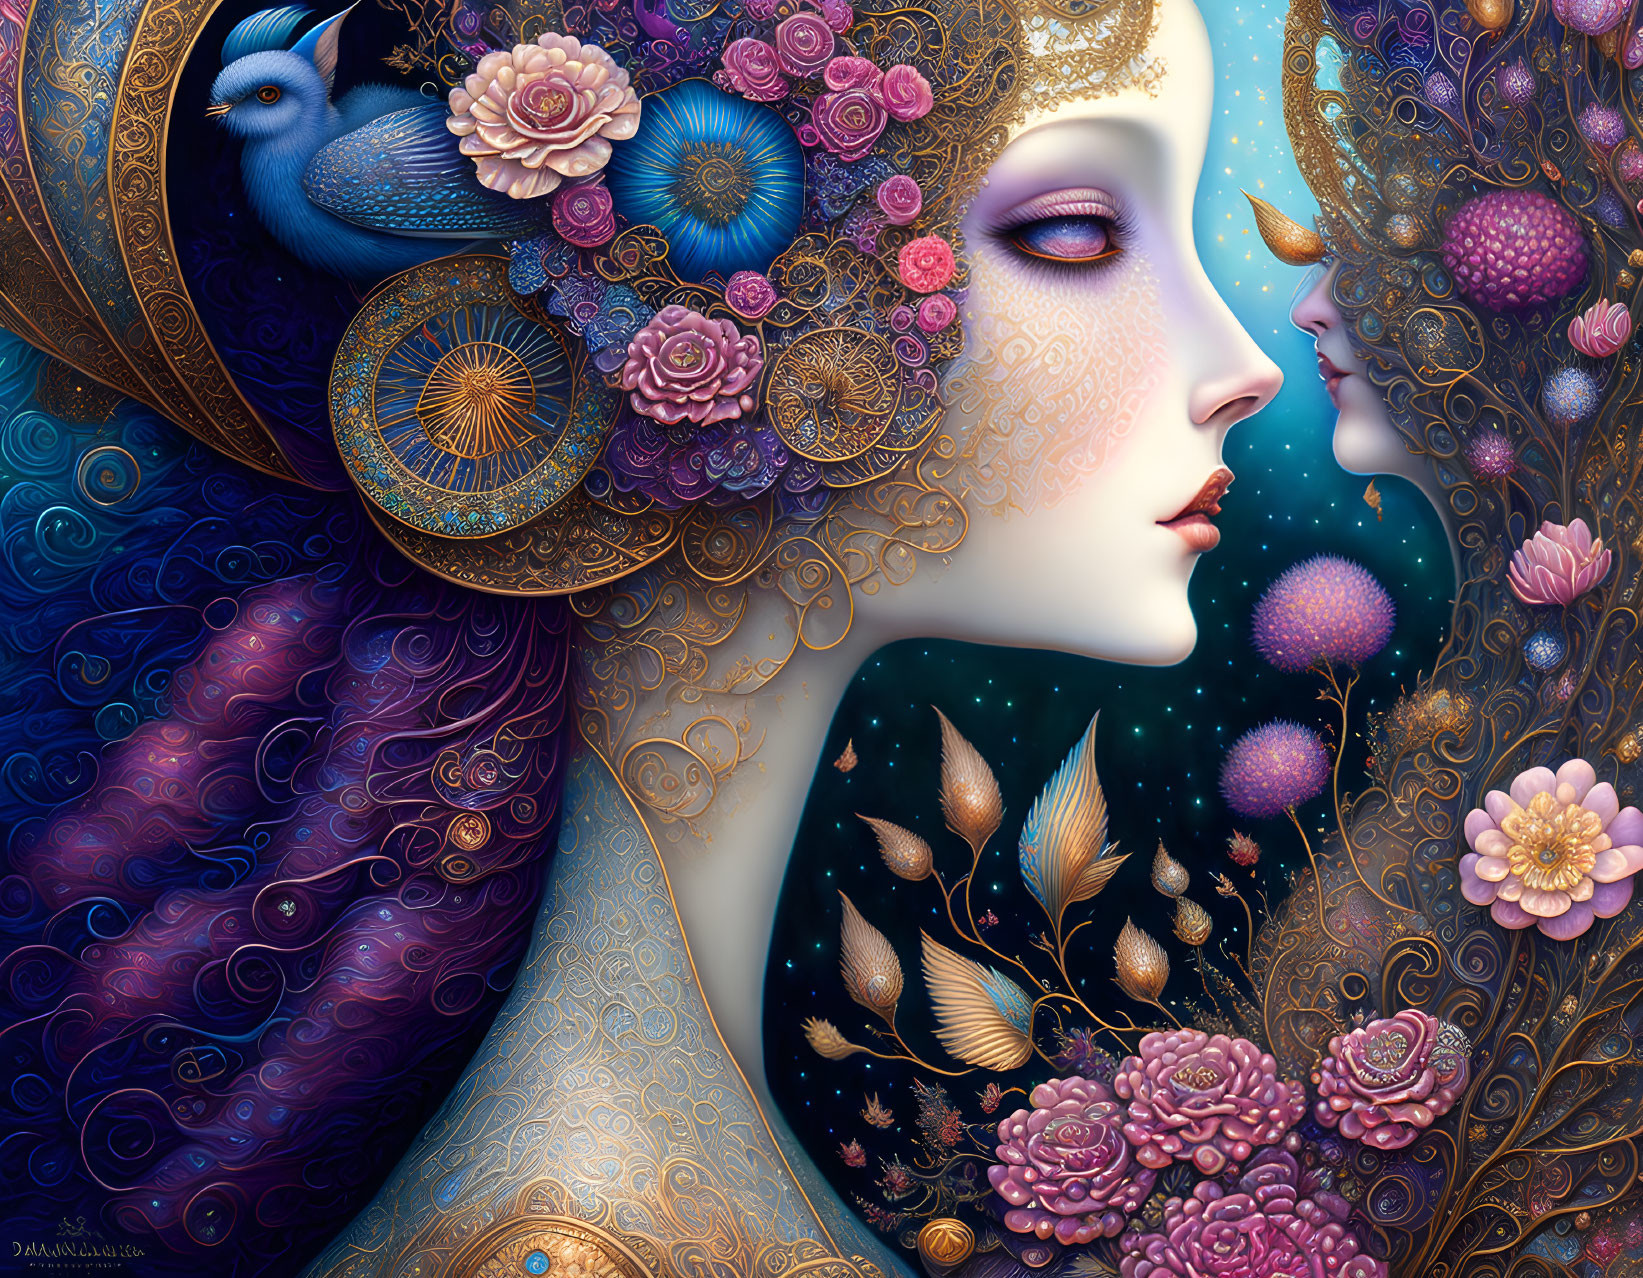 Digital artwork of two stylized female faces with floral and cosmic motifs, blue bird, and golden fil